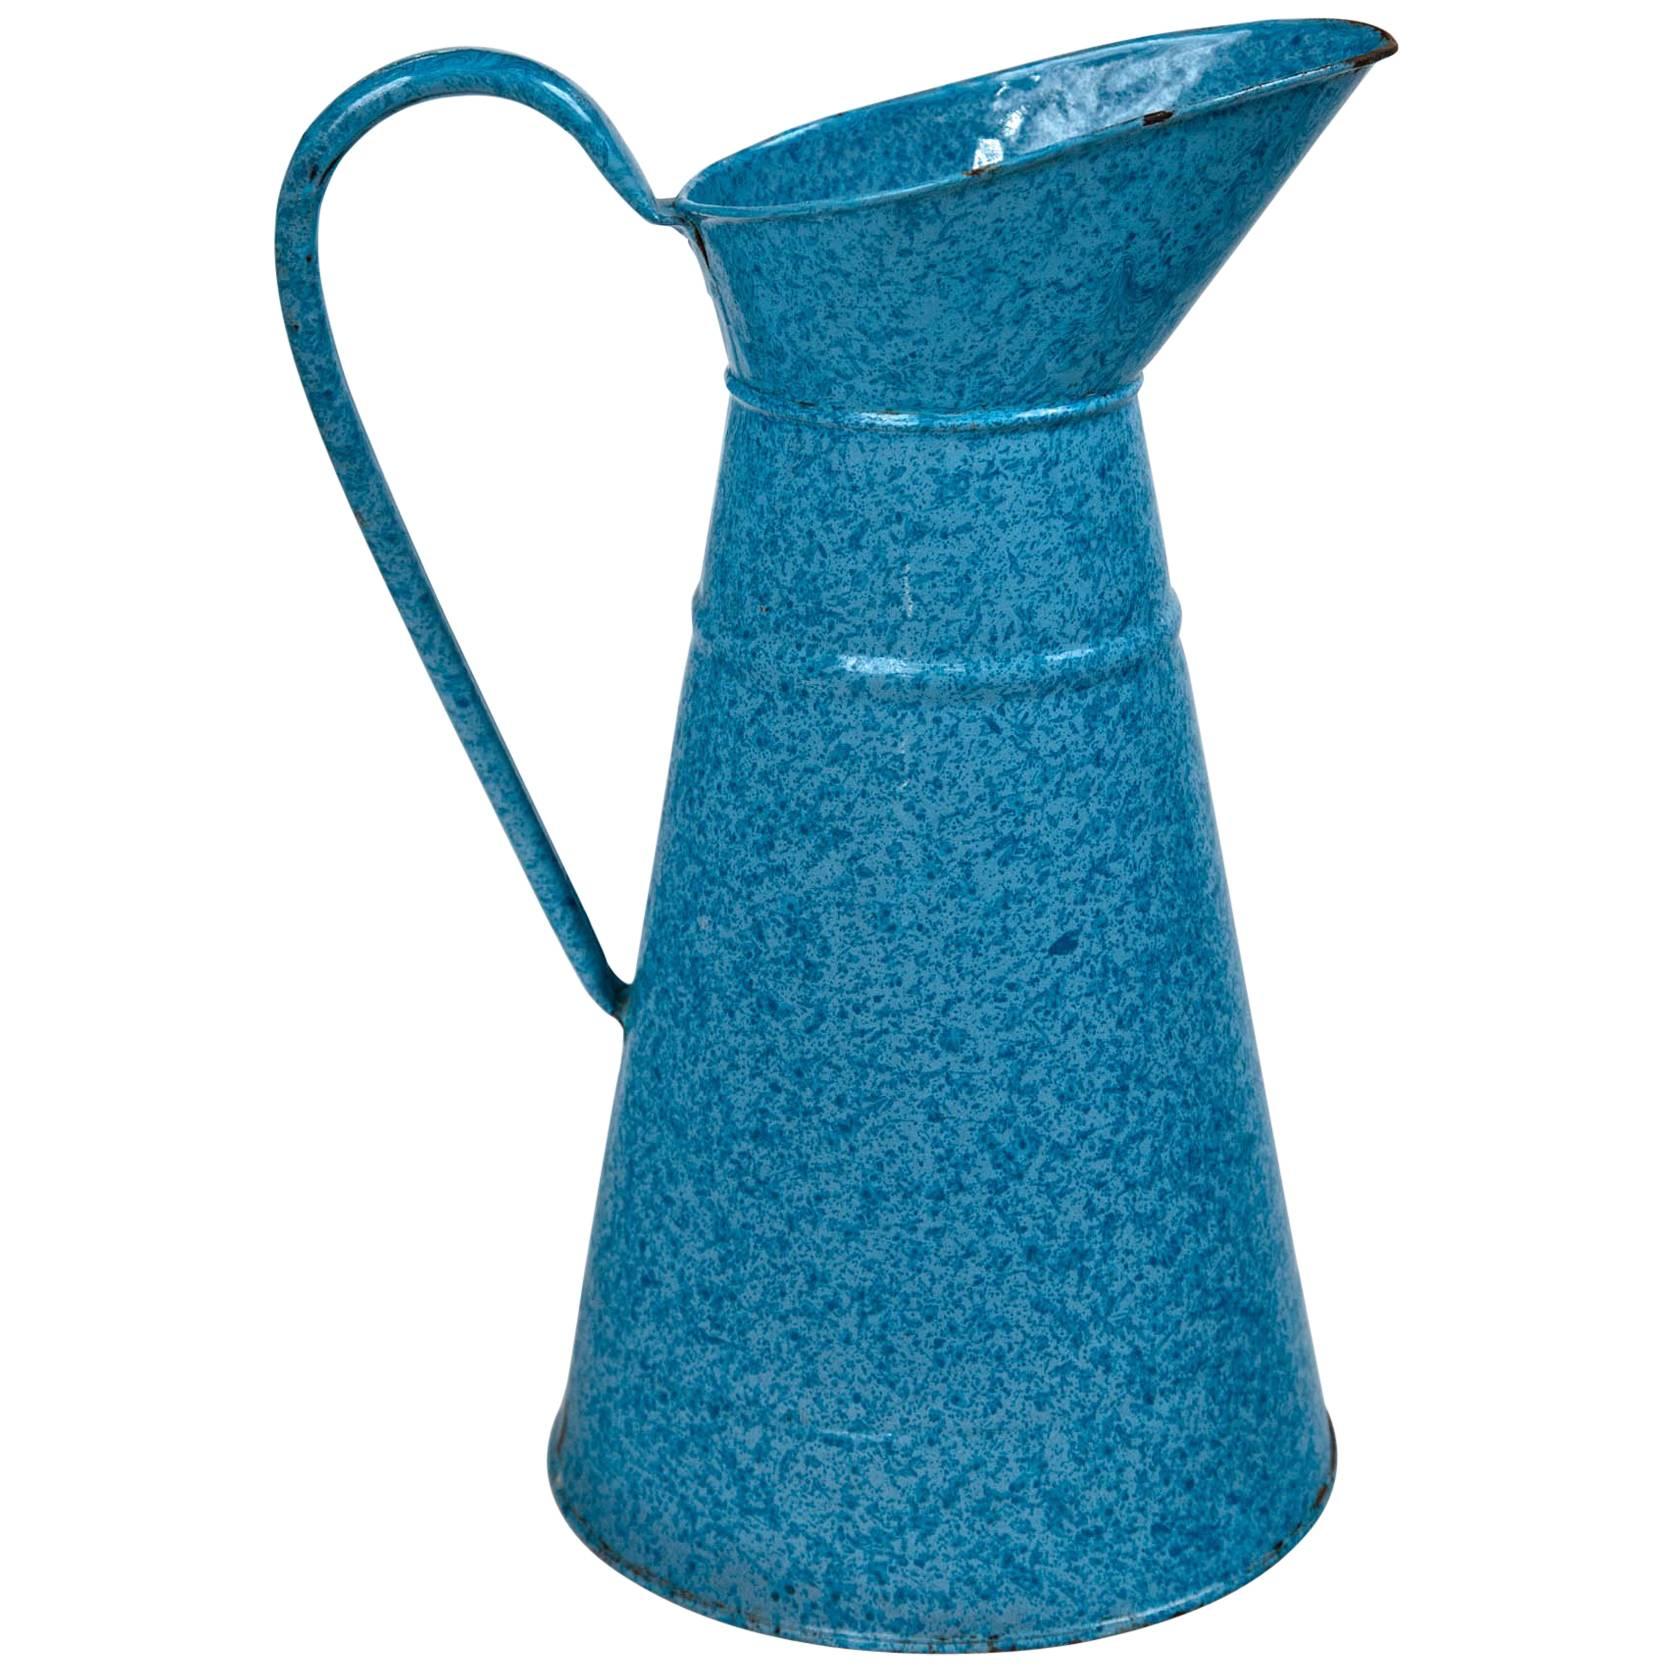 Vintage French Enamelware Pitcher, circa 1920 For Sale